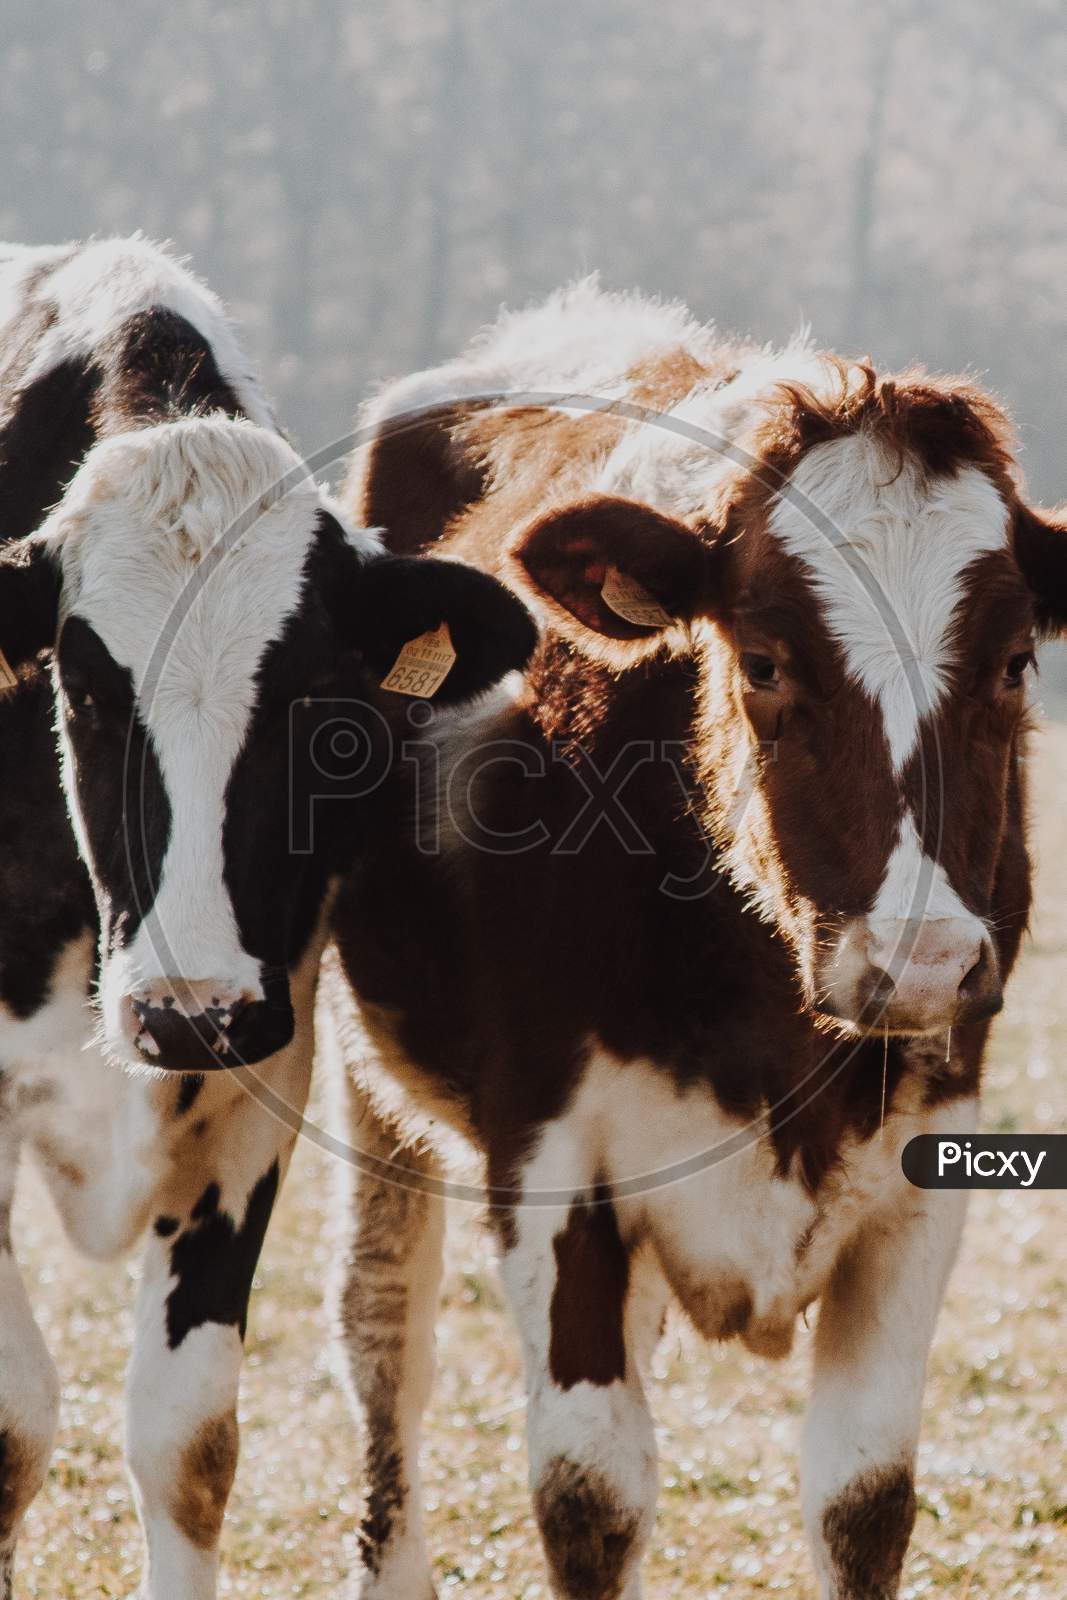 Baby Cows Resting And Looking Straight To Camera